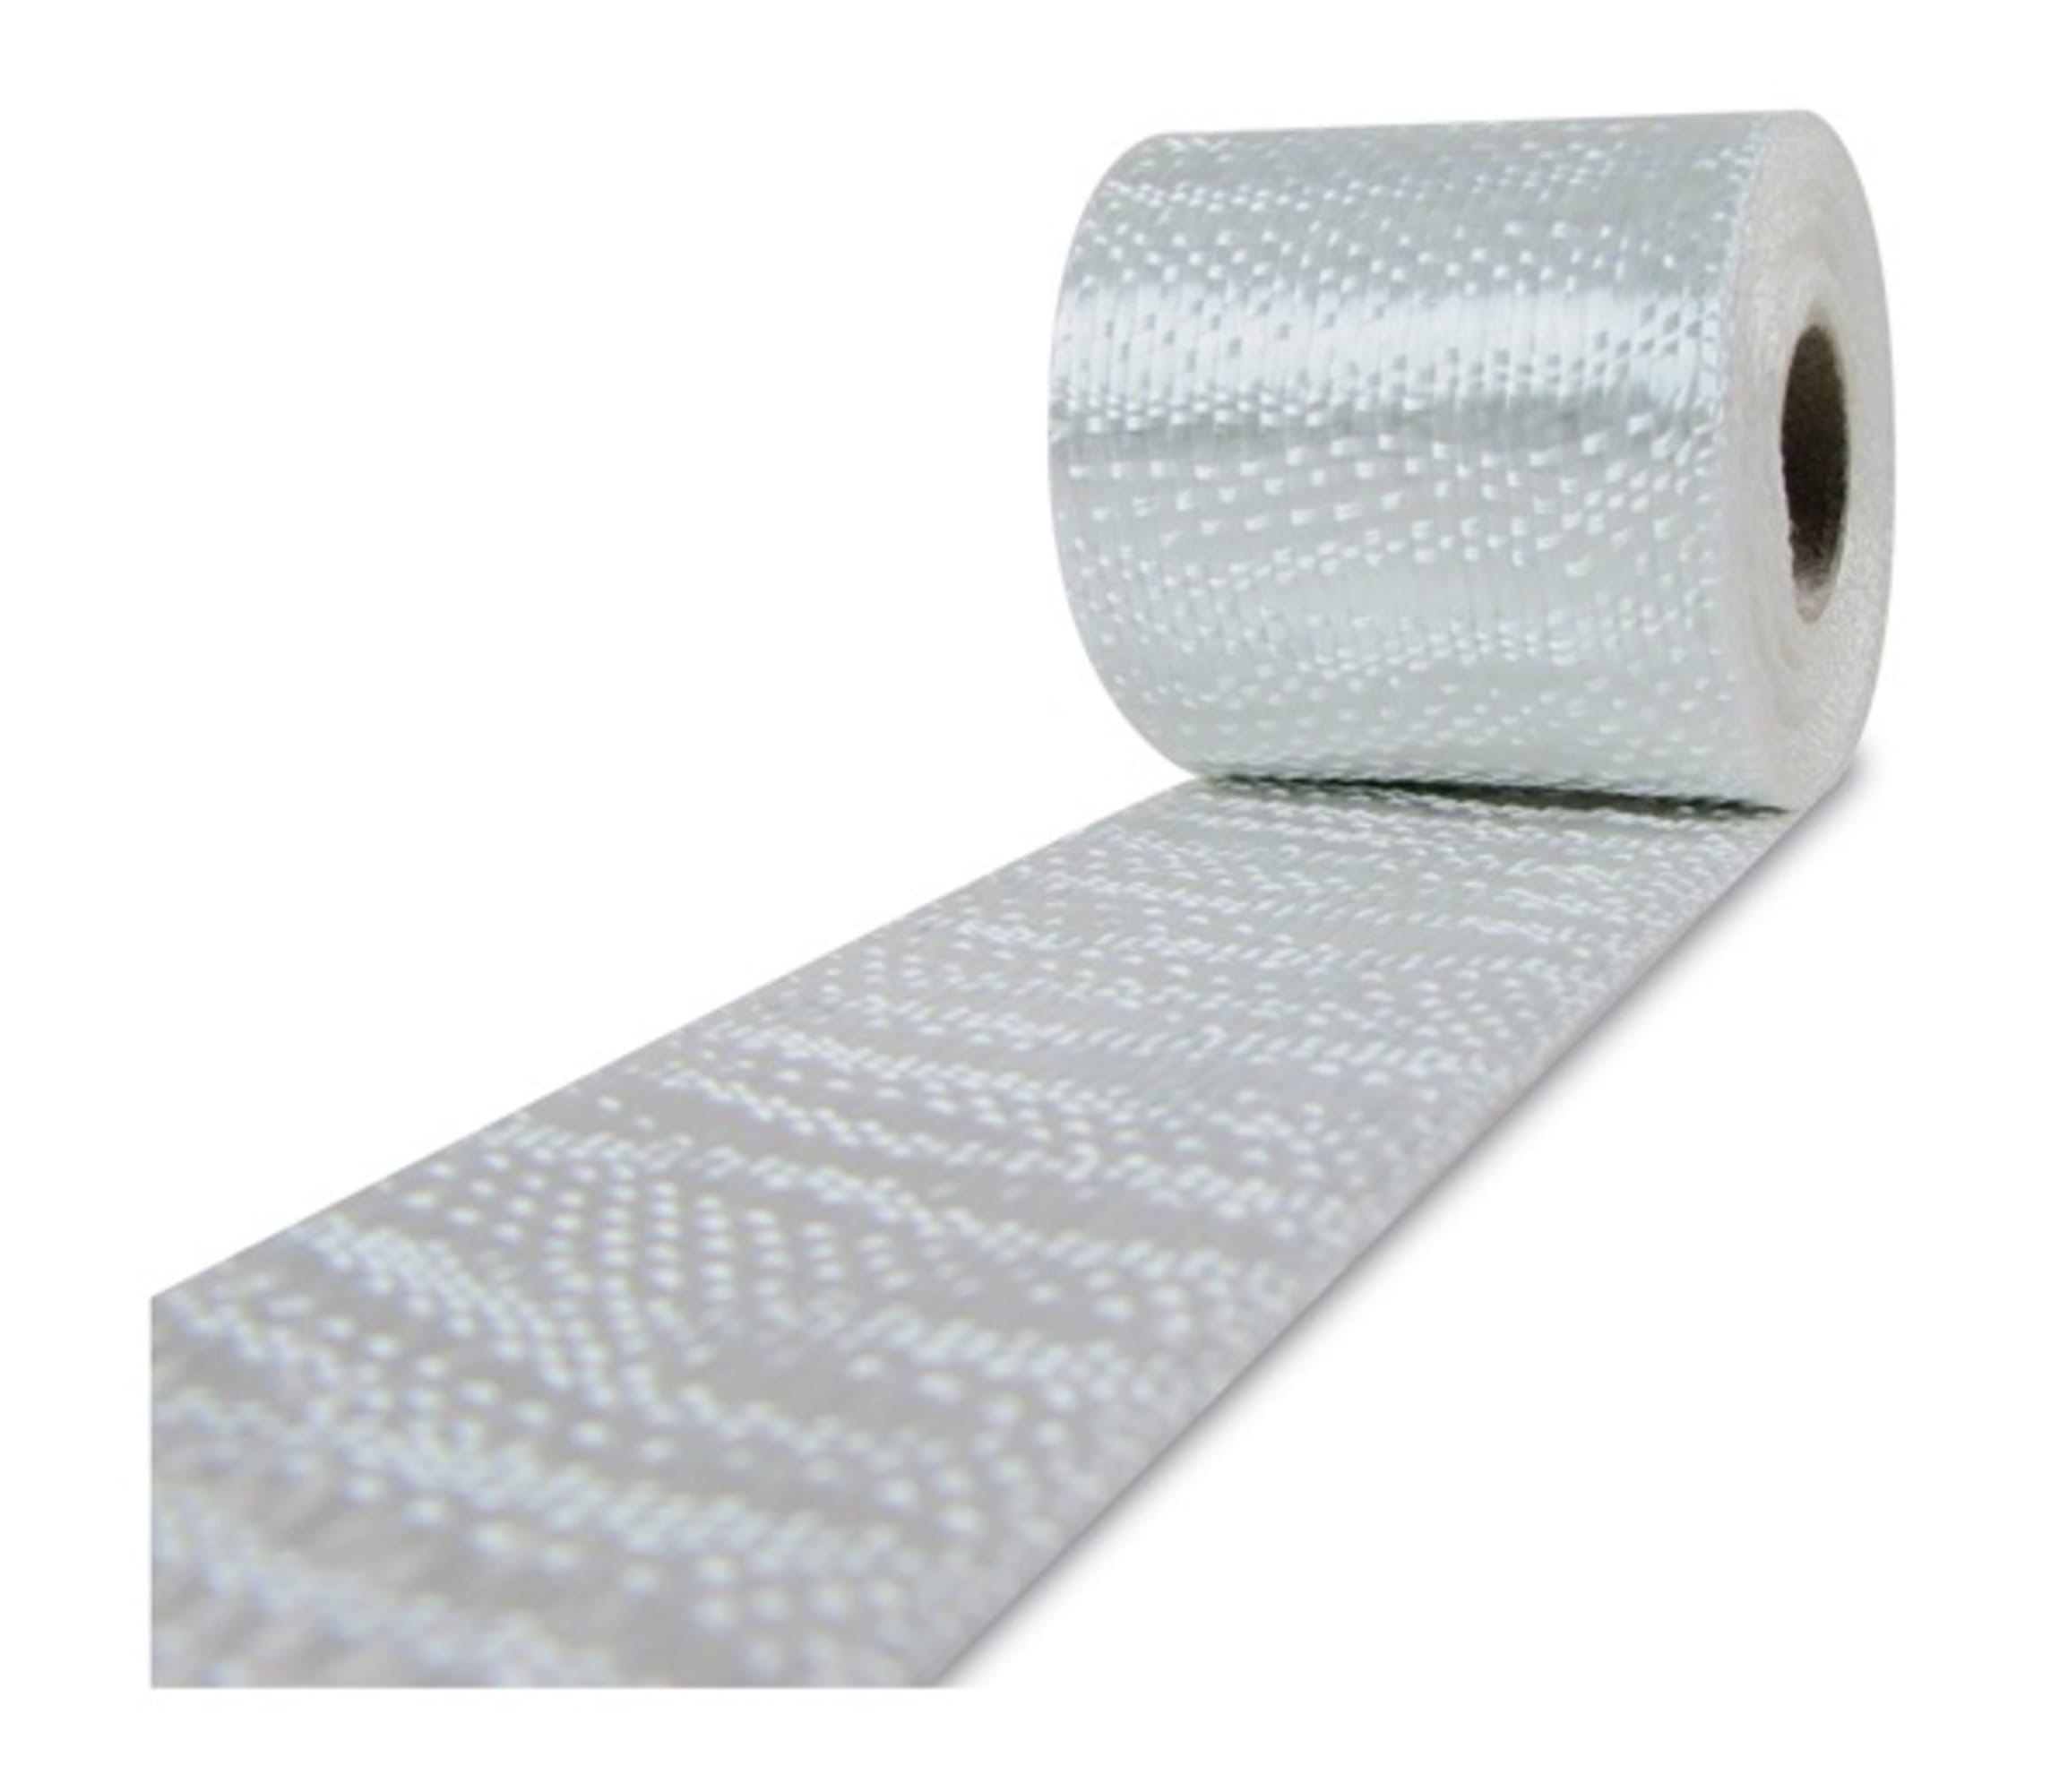 Glass fabric tape 220 g/m² (Silane, unidirectional, plain weave) 50 mm